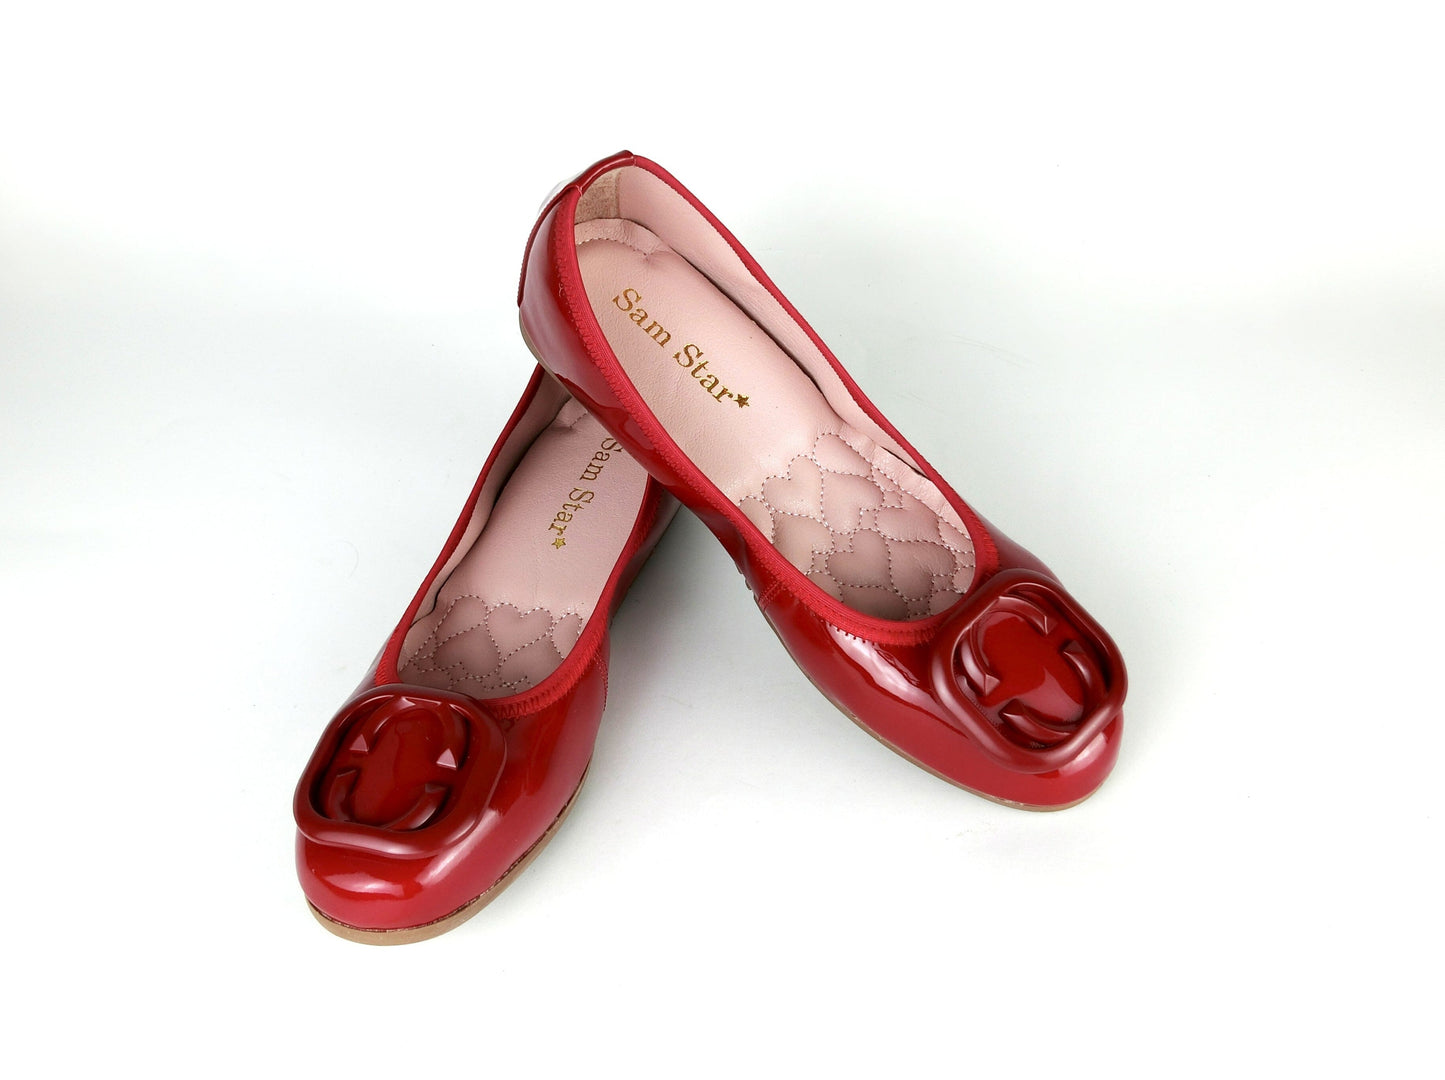 17W01 Leather buckle pumps with extra cushions (NEW) Pumps Sam Star Shoes Red 37 (4) 